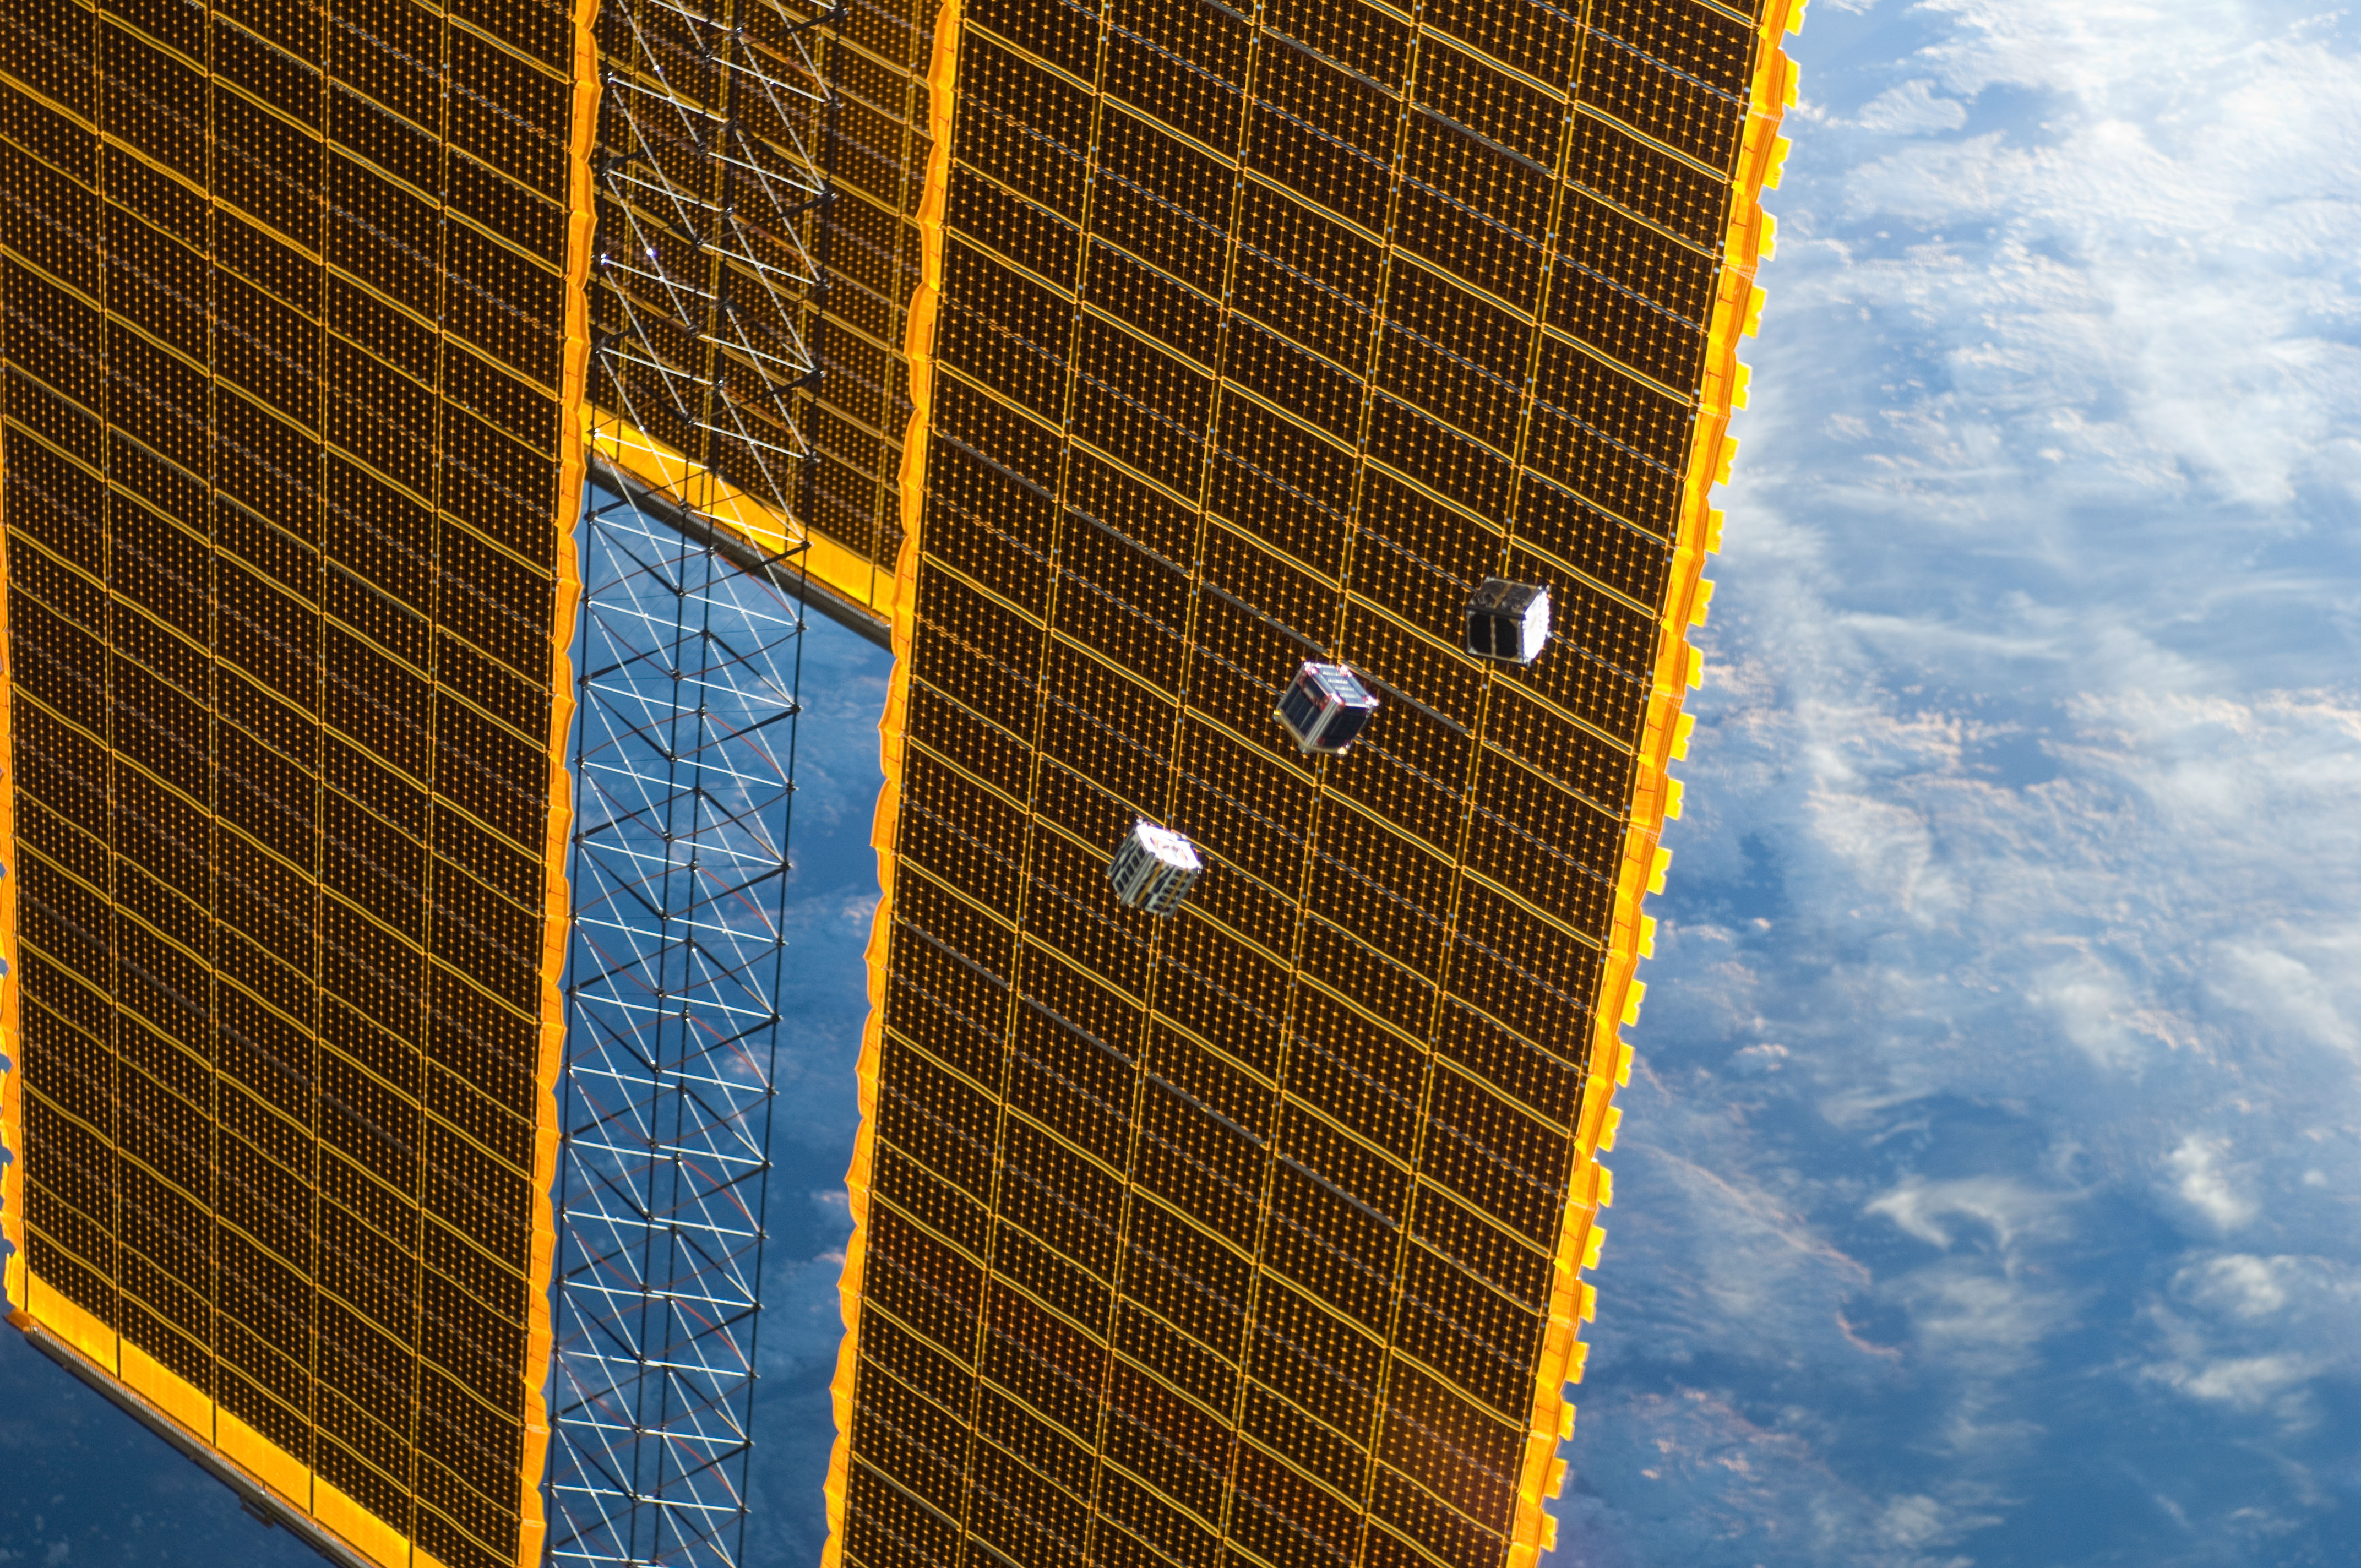 CubeSats launched from ISS by NASA